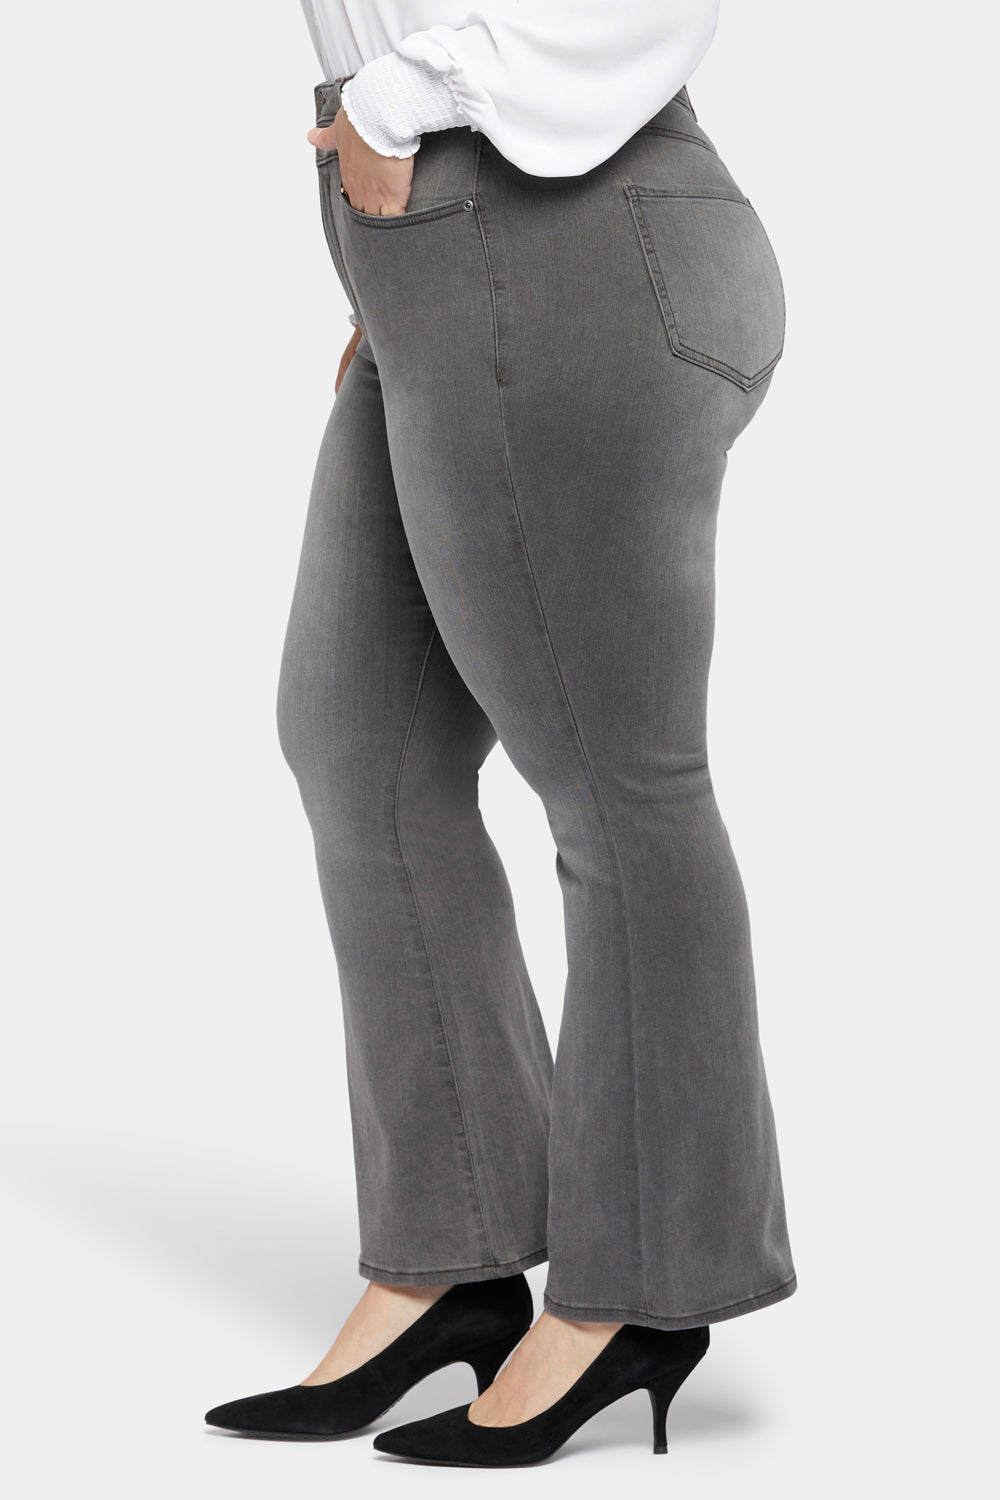 Ava Flared Jeans In Plus Size With High Rise And Paneled Waistband - Smokey  Mountain Grey | NYDJ